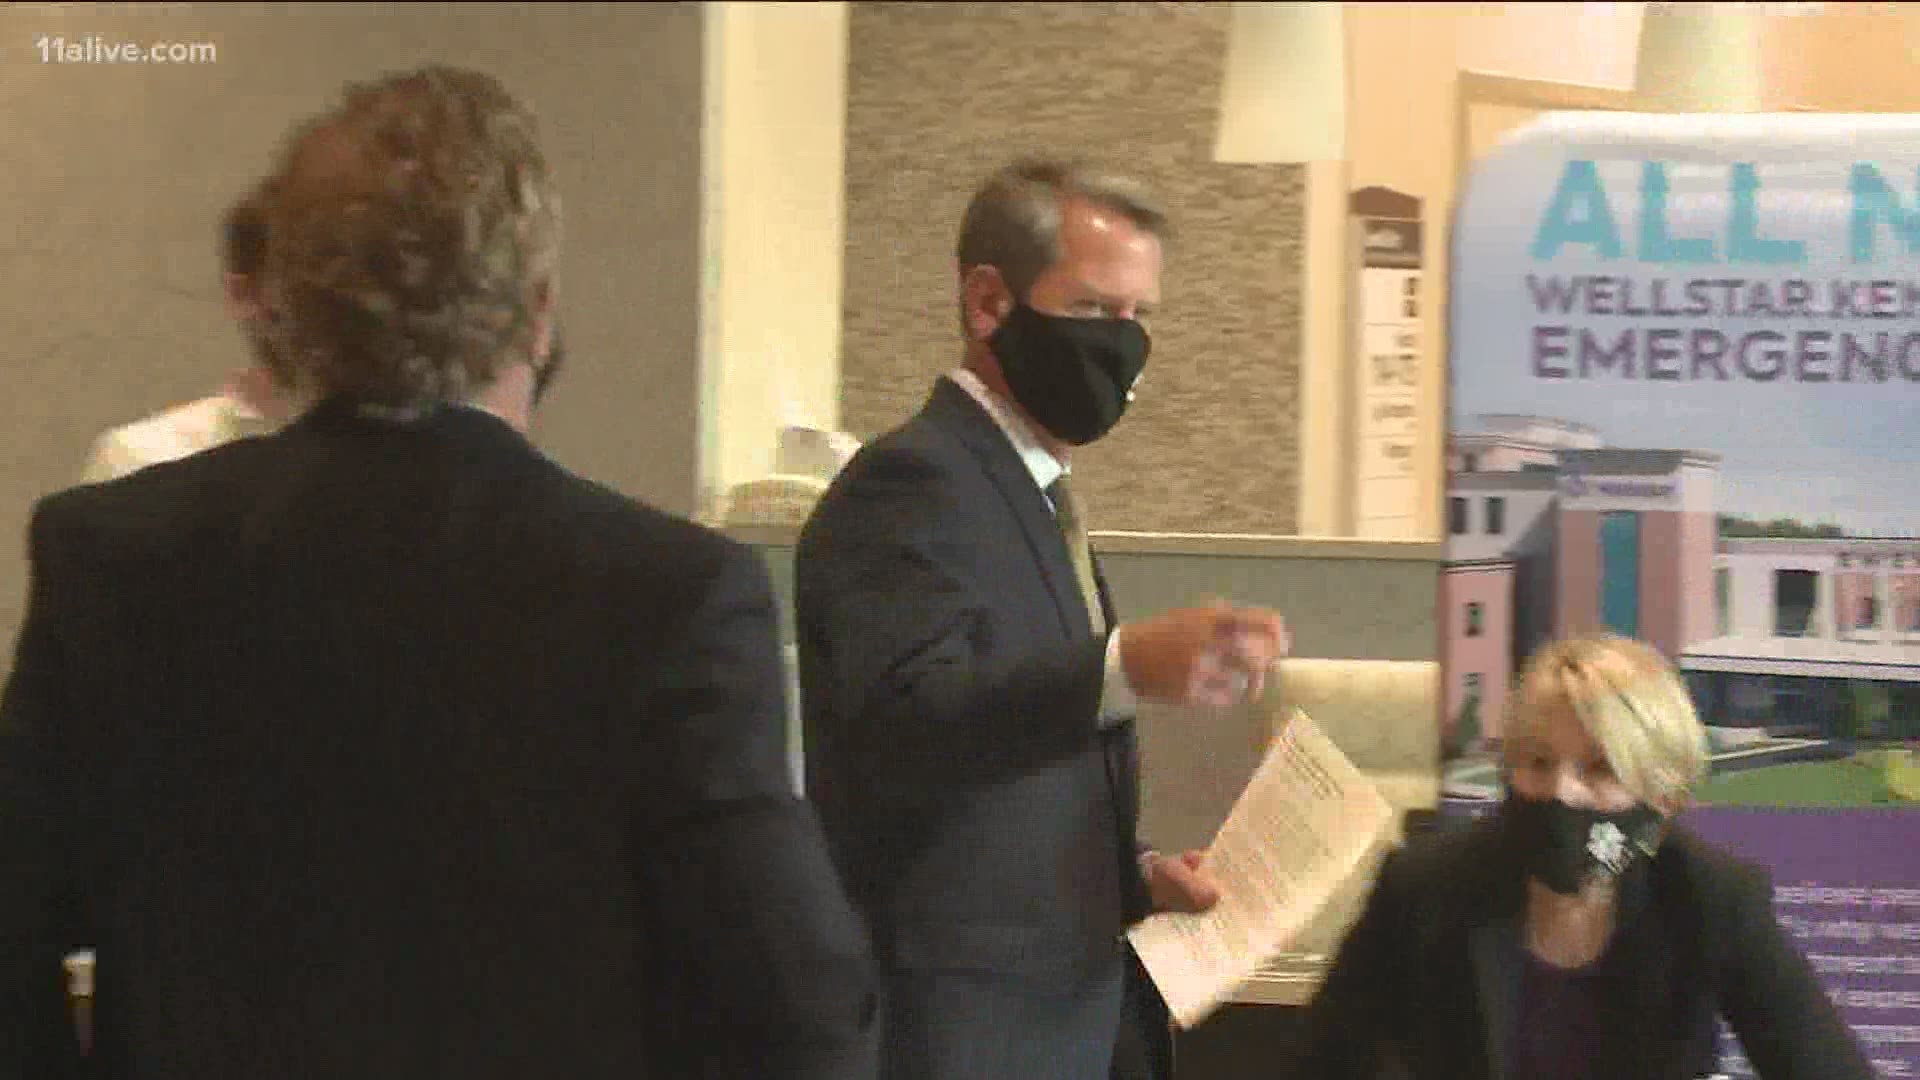 The governor's order overturns orders in cities like Atlanta and Athens requiring masks.